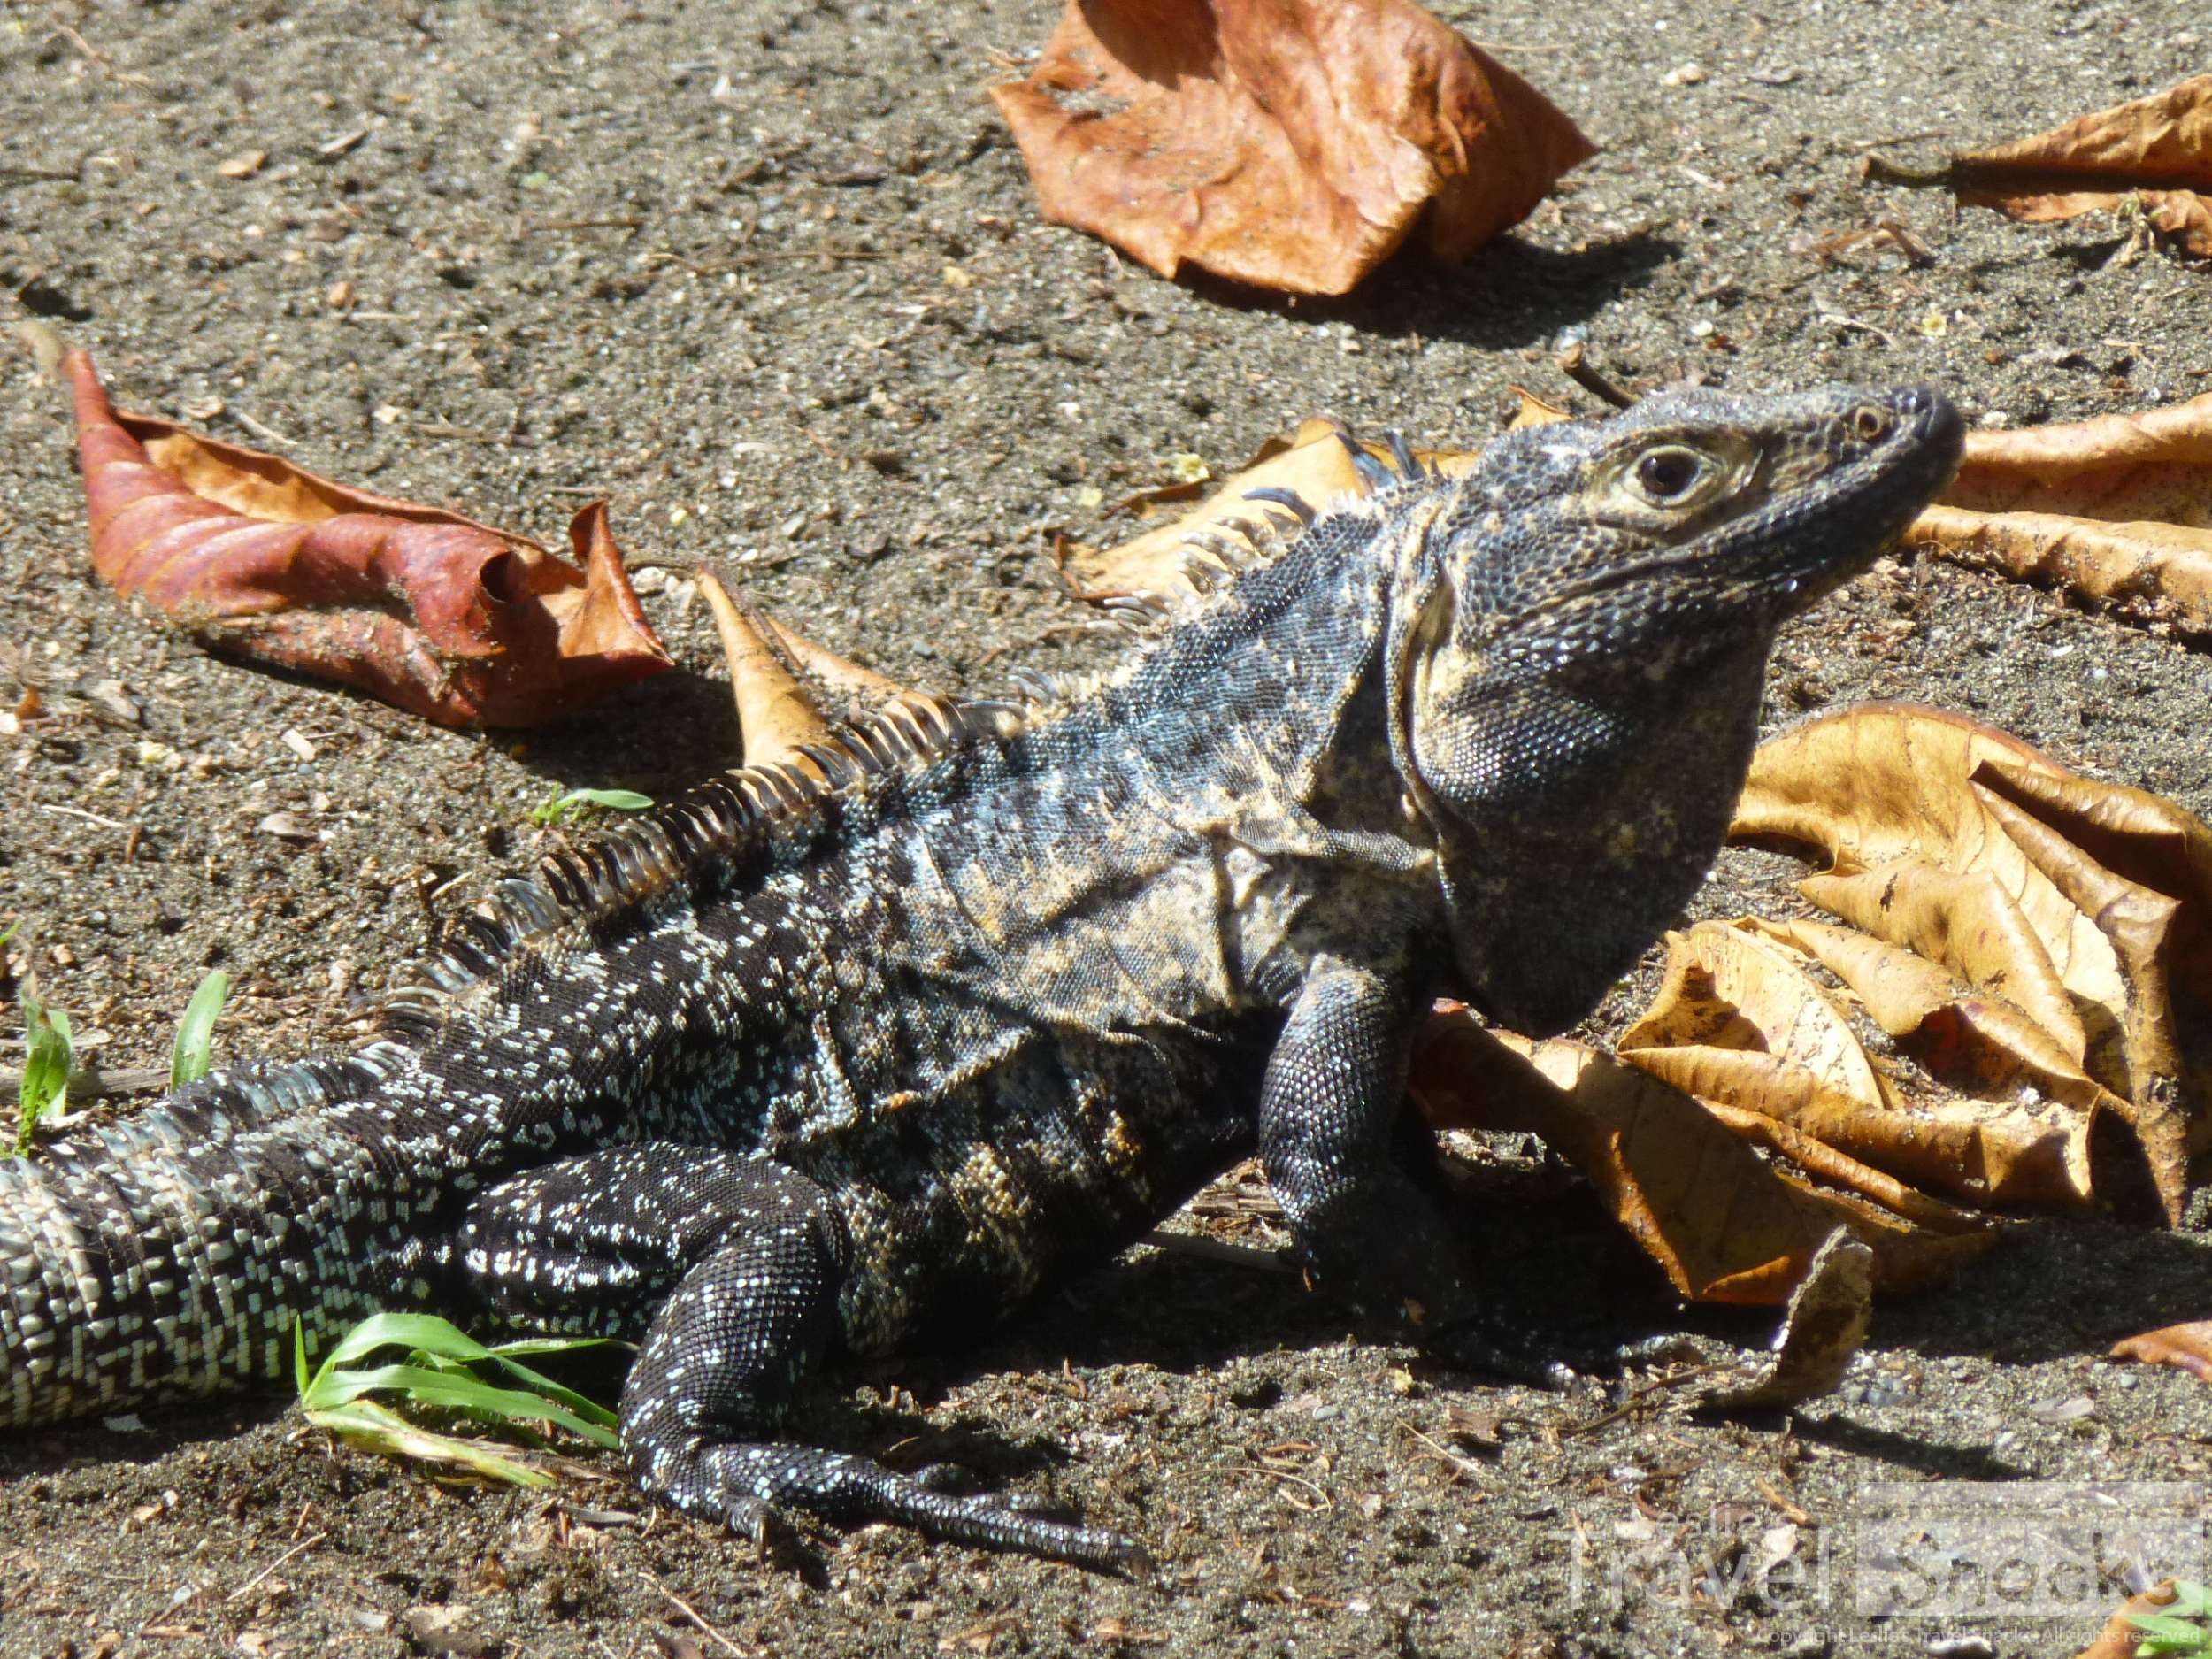 I had a few resident iguanas in my yard that would come out every morning and lay in the sun for a while. 